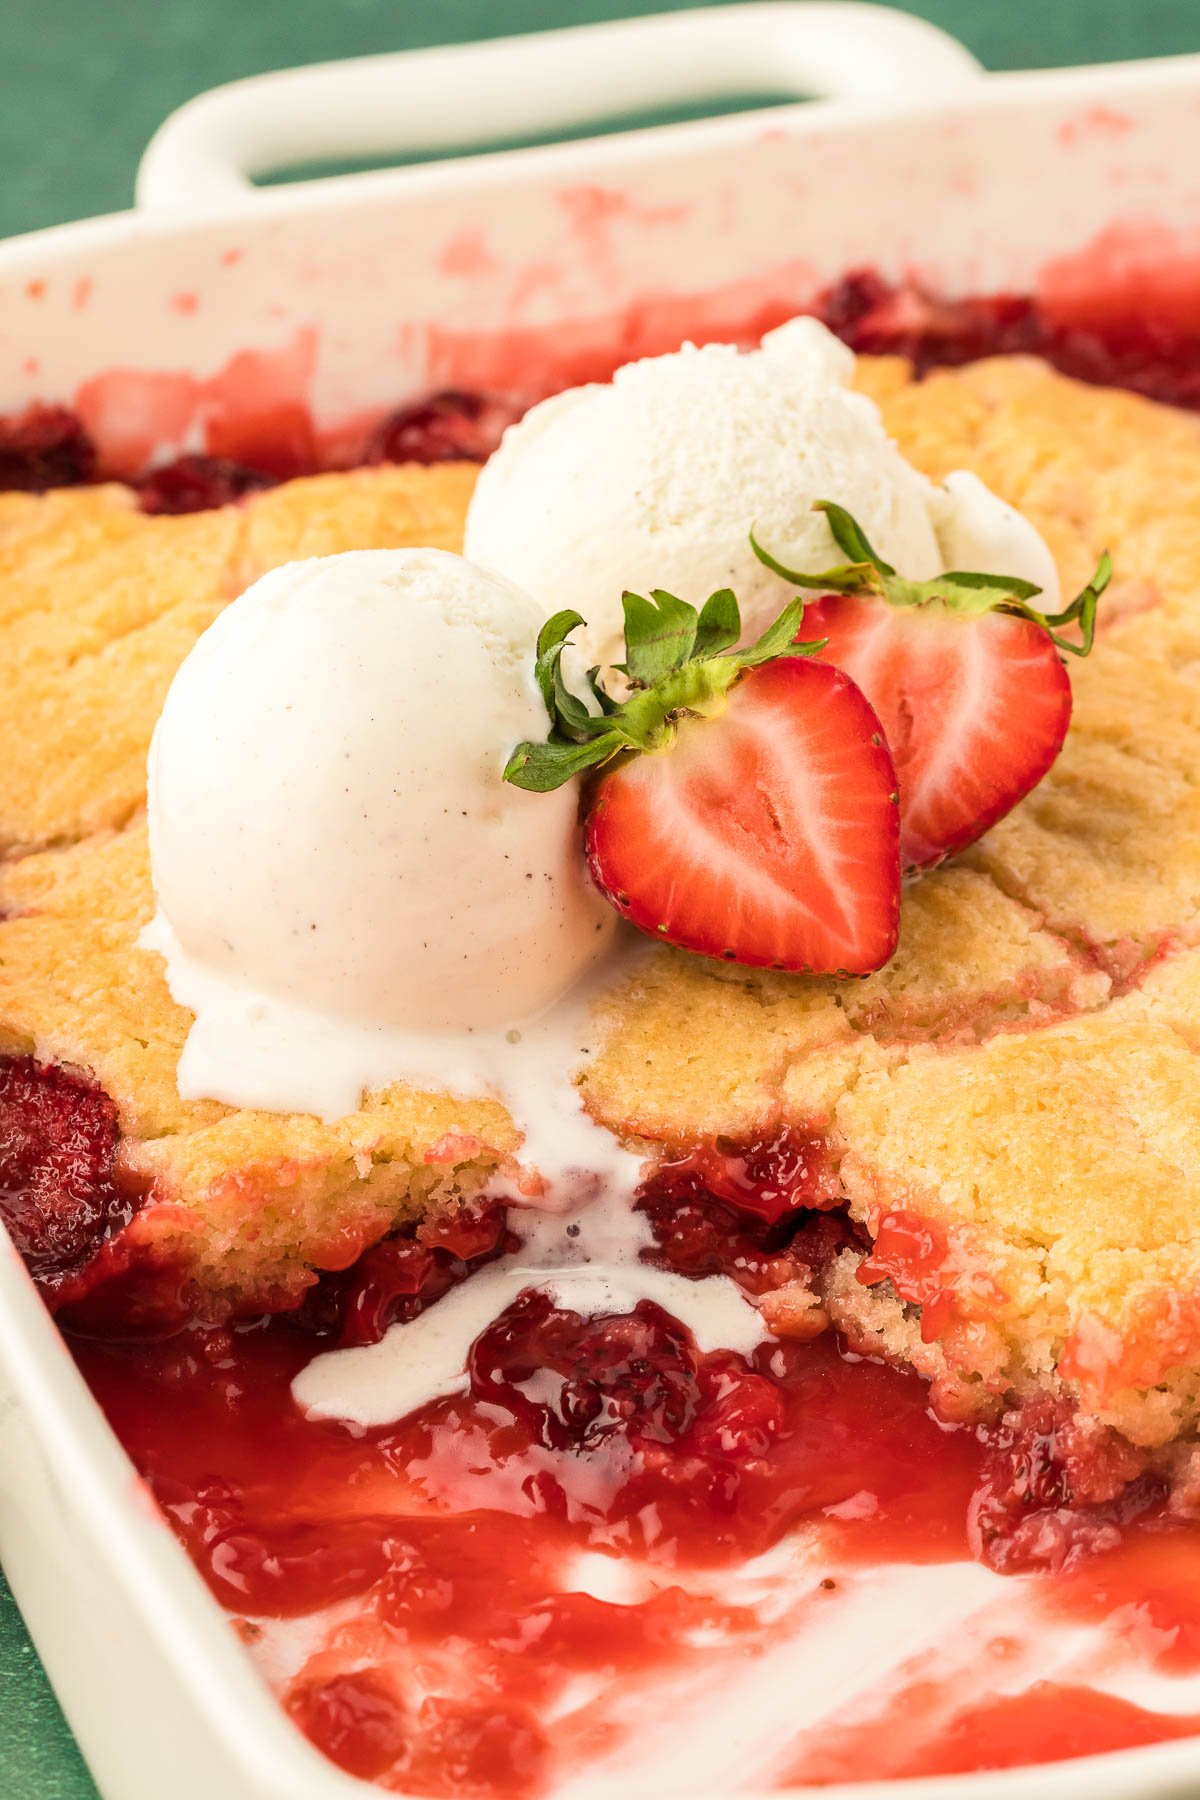 Two scoops of vanilla ice cream on a pan of strawberry cobbler.